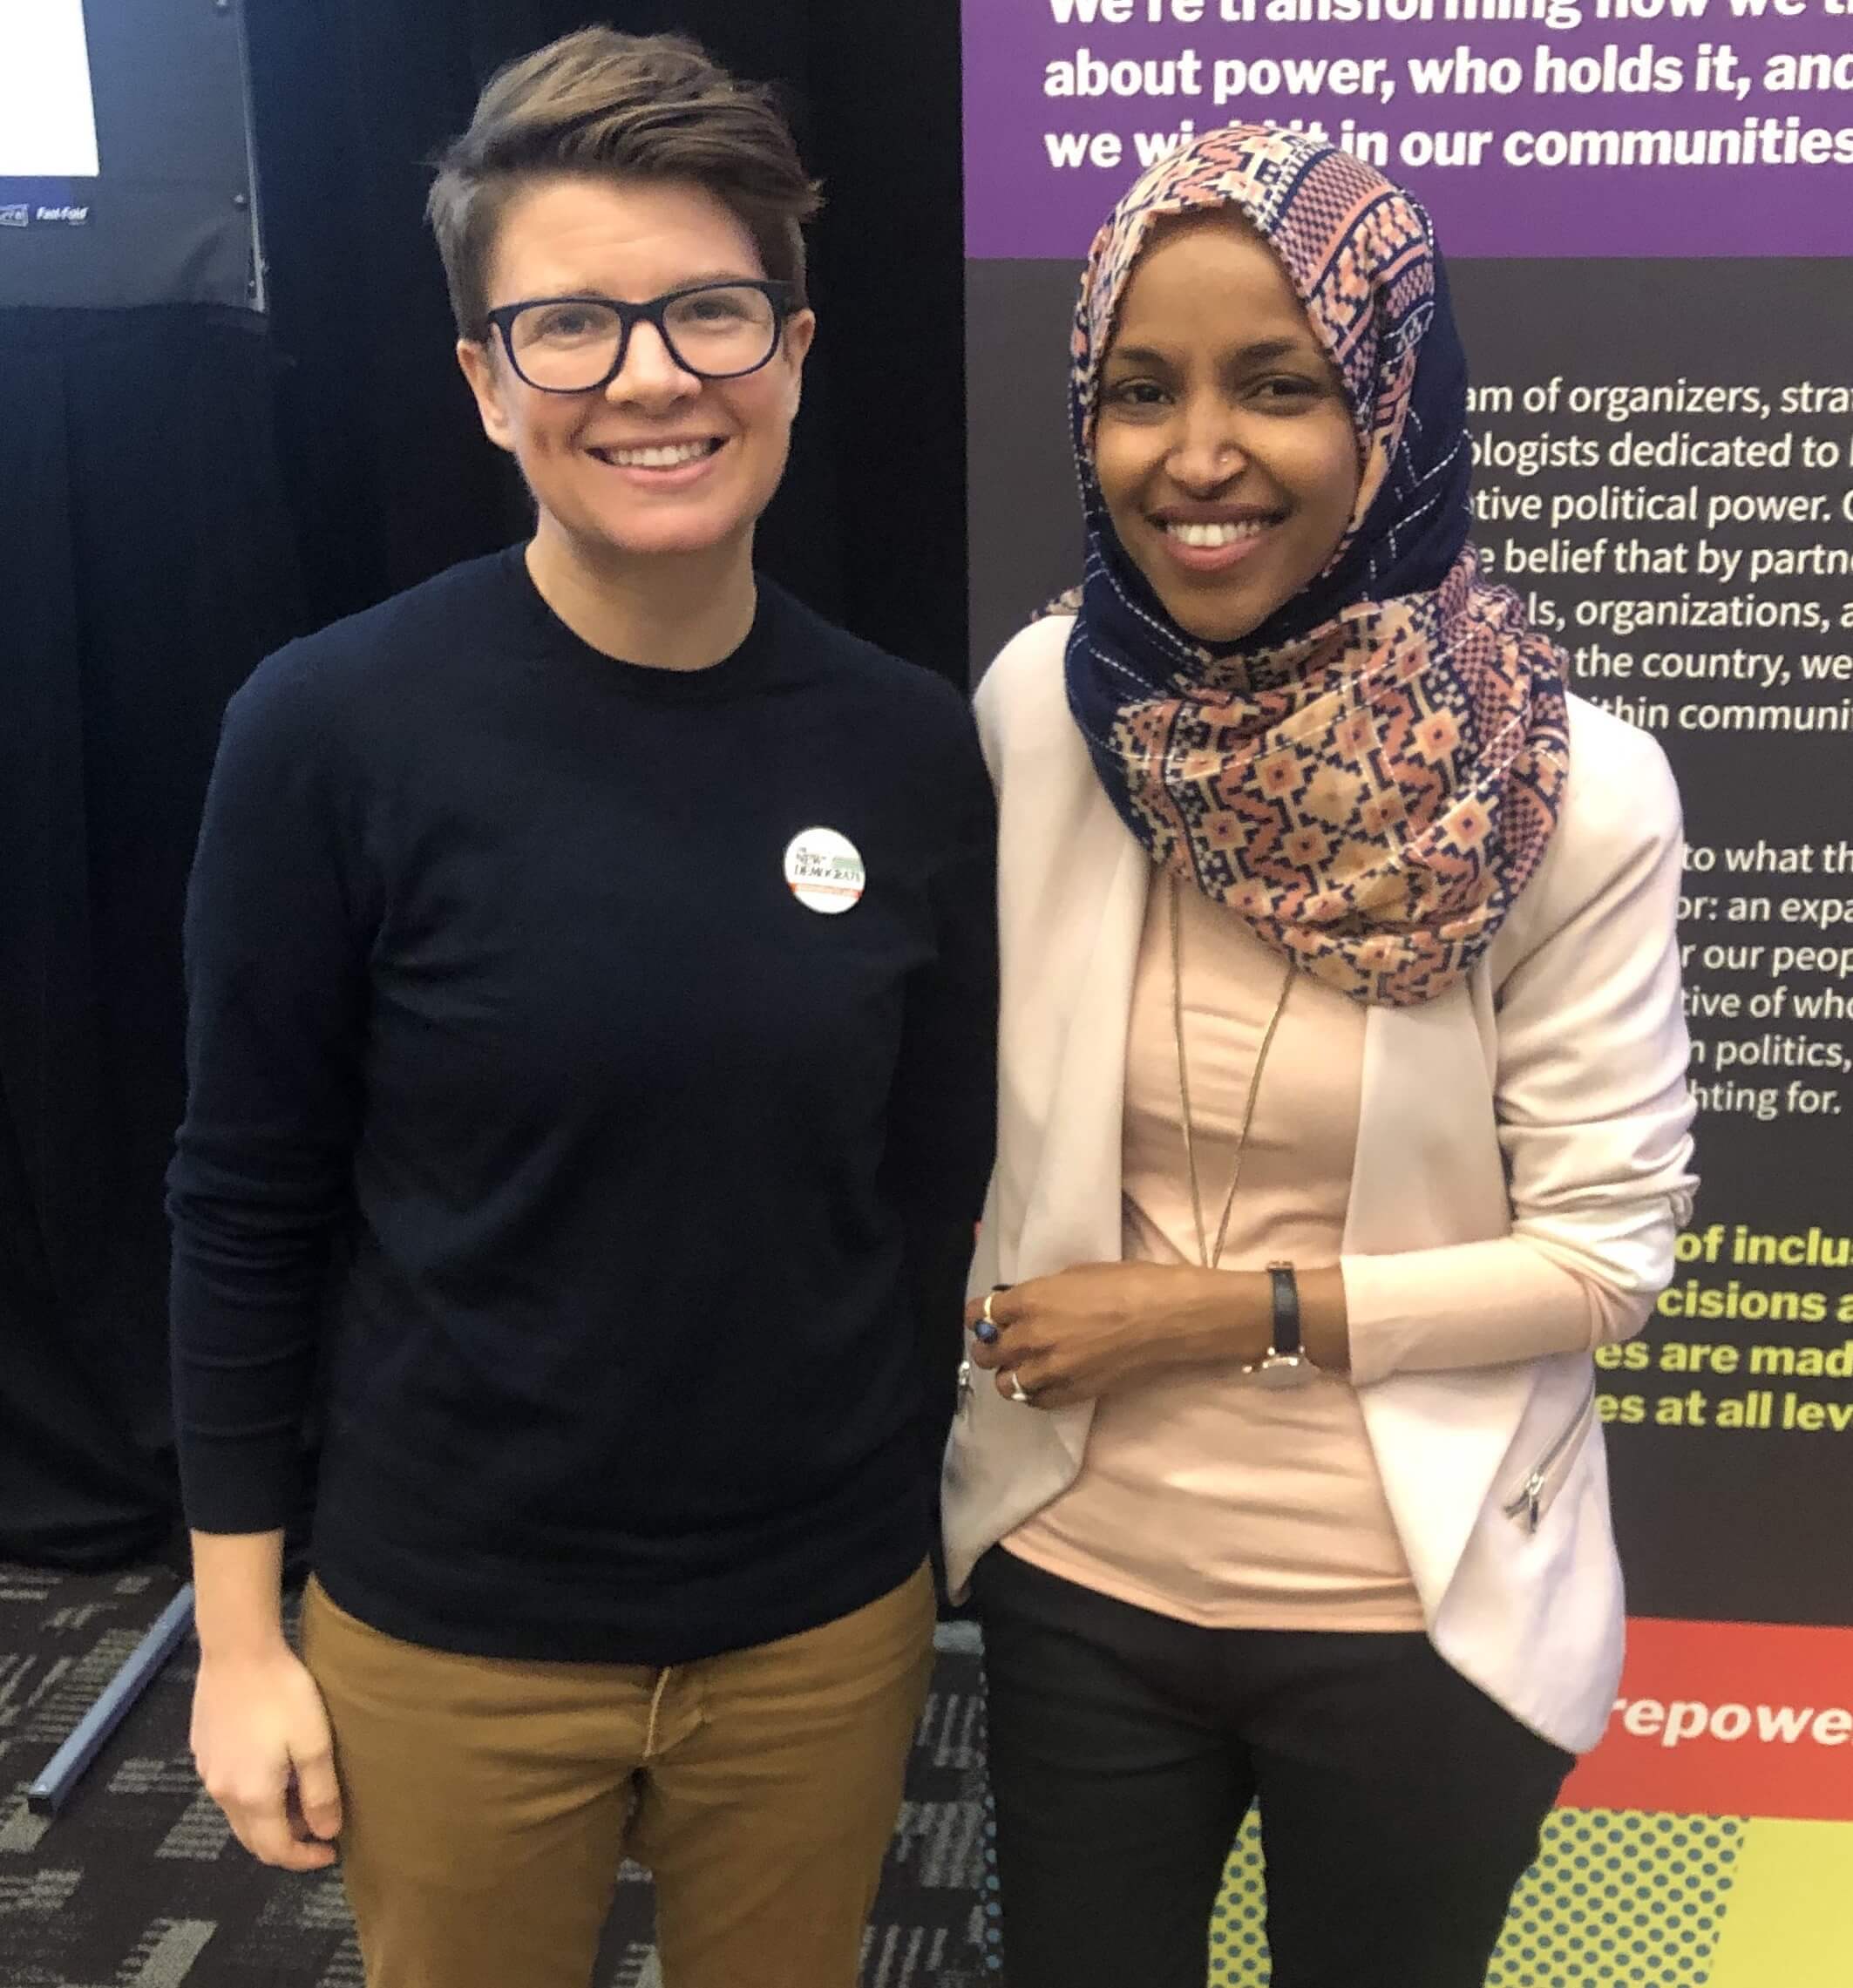 Me trying to play it cool meeting Rep-Elect Ilhan Omar